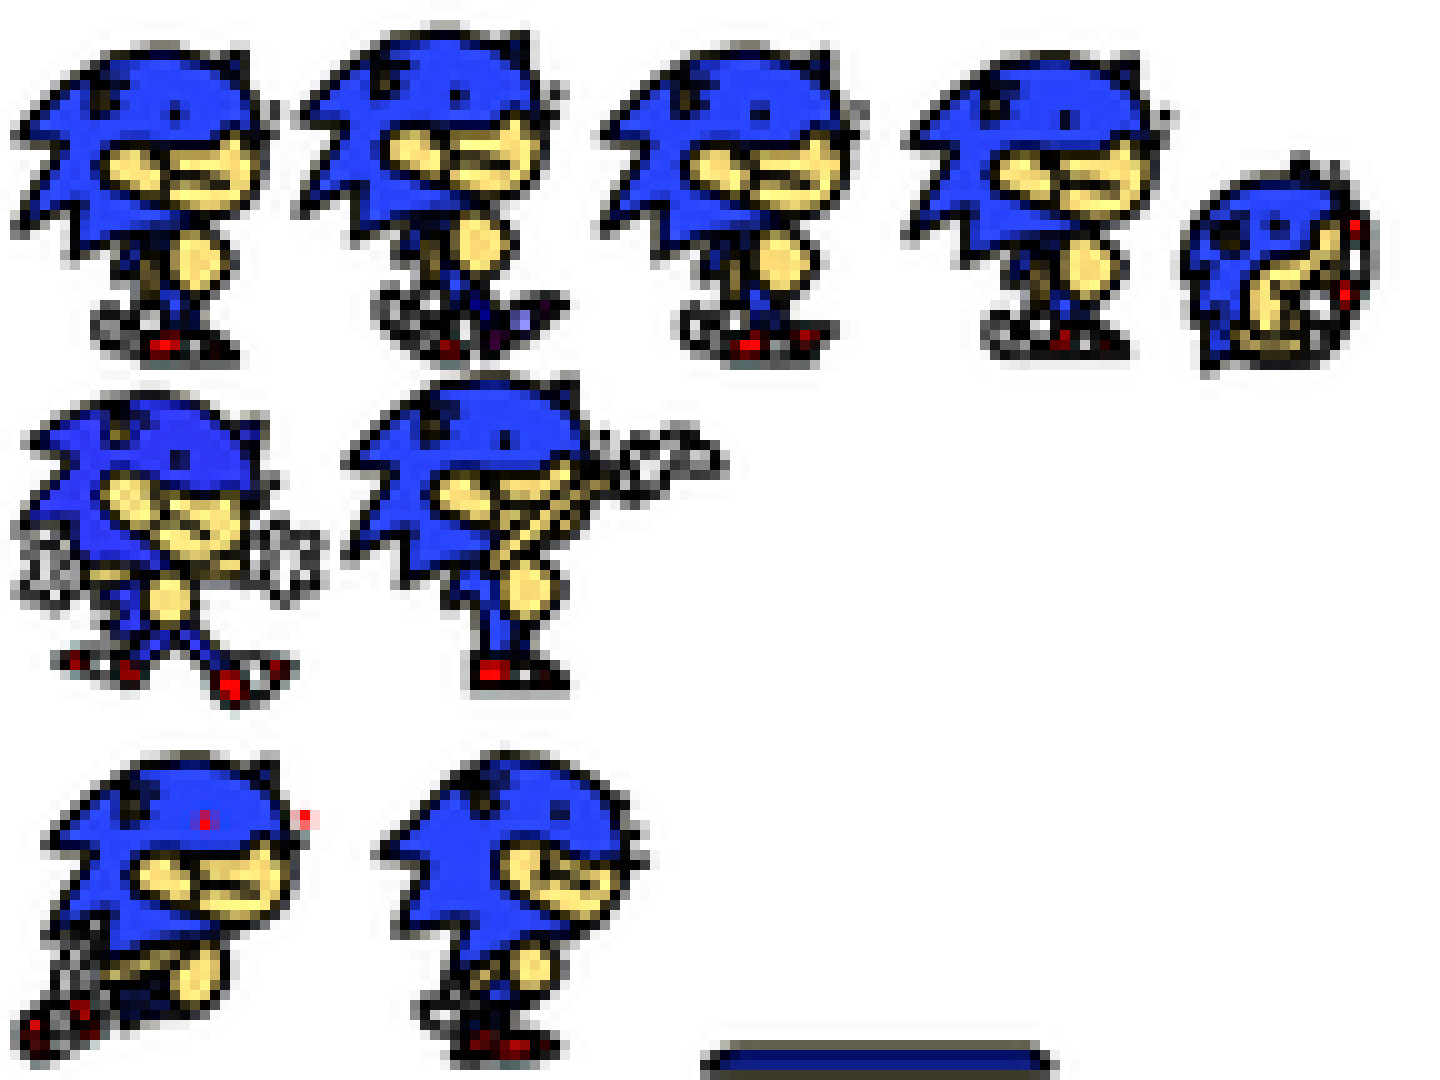 Sunky the game 3 [Sonic 3 A.I.R.] [Concepts]